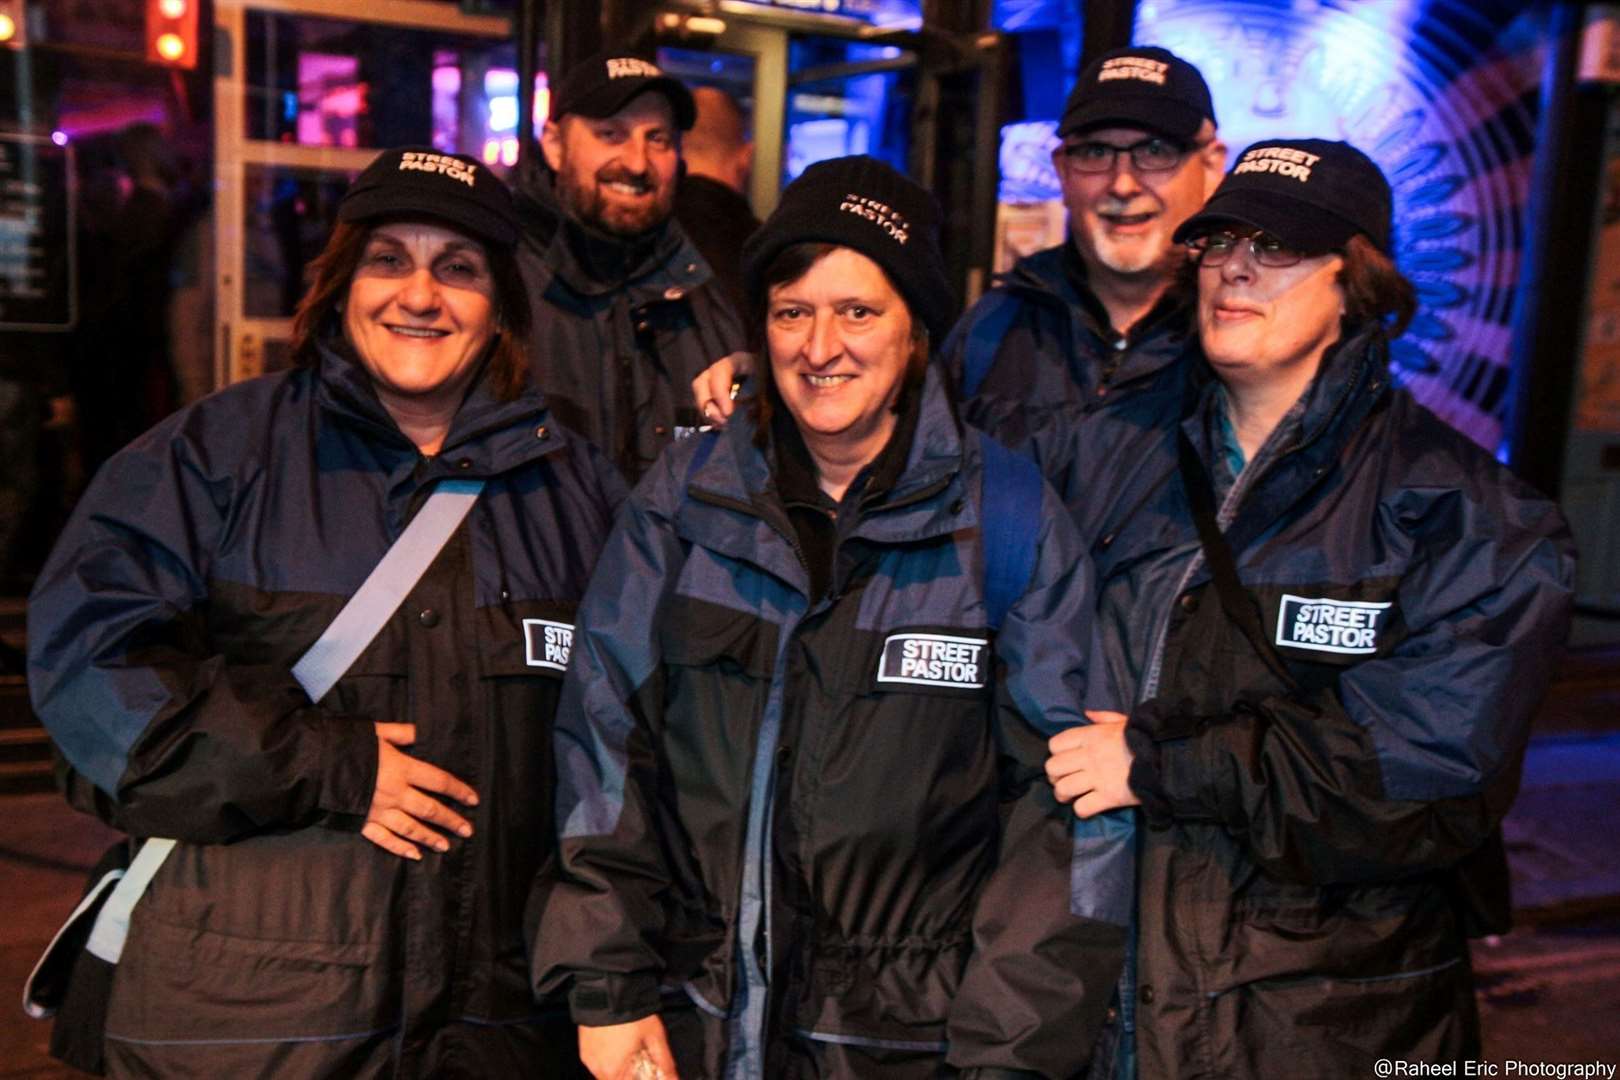 Canterbury's Street Pastors patrol the streets on Friday and Saturday nights offering help to those in need